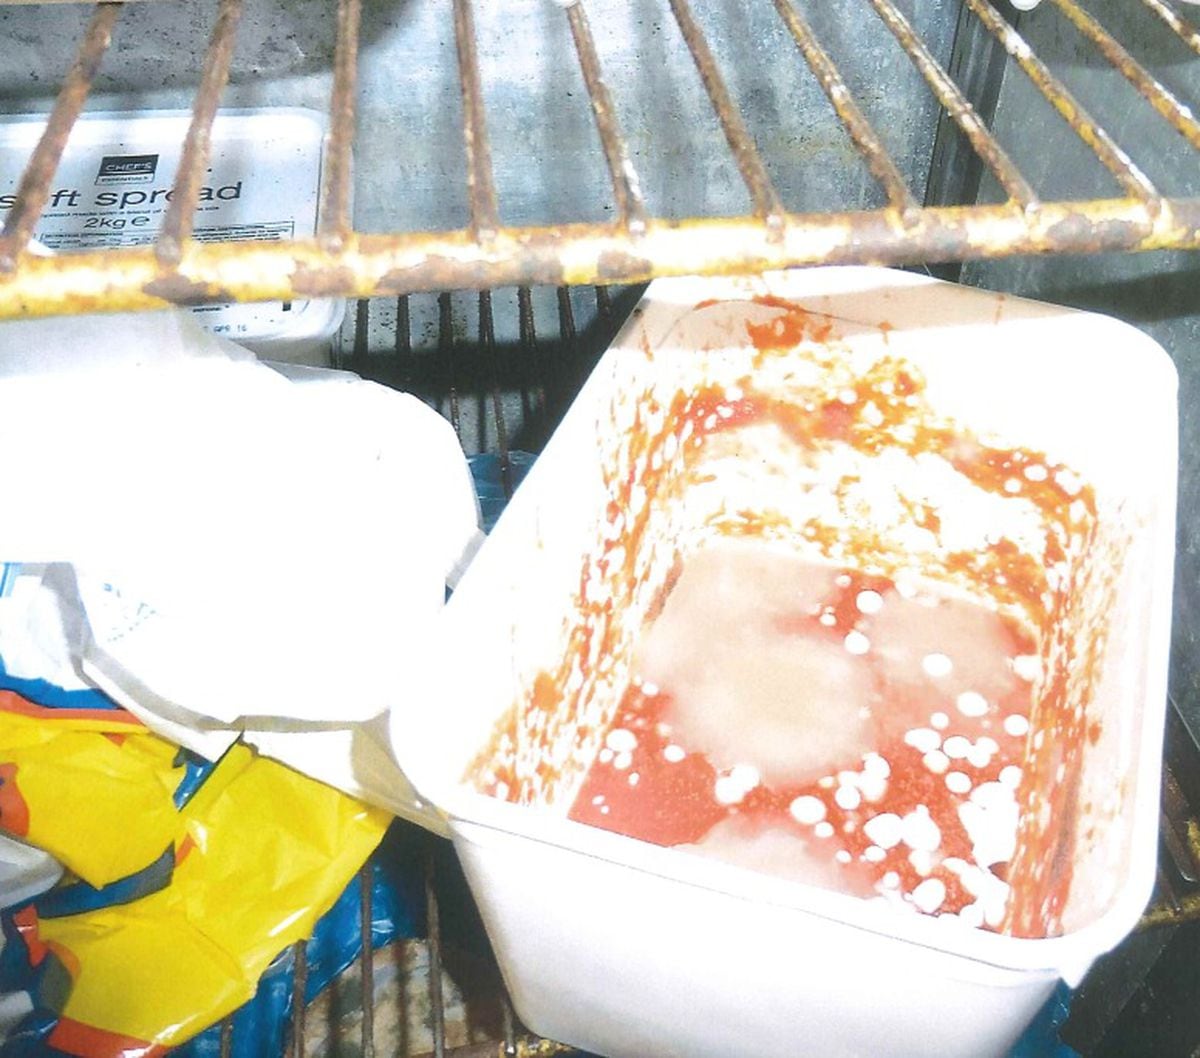 Inspectors found food unfit for human consumption, improperly stored food, filthy storage areas and filthy equipment